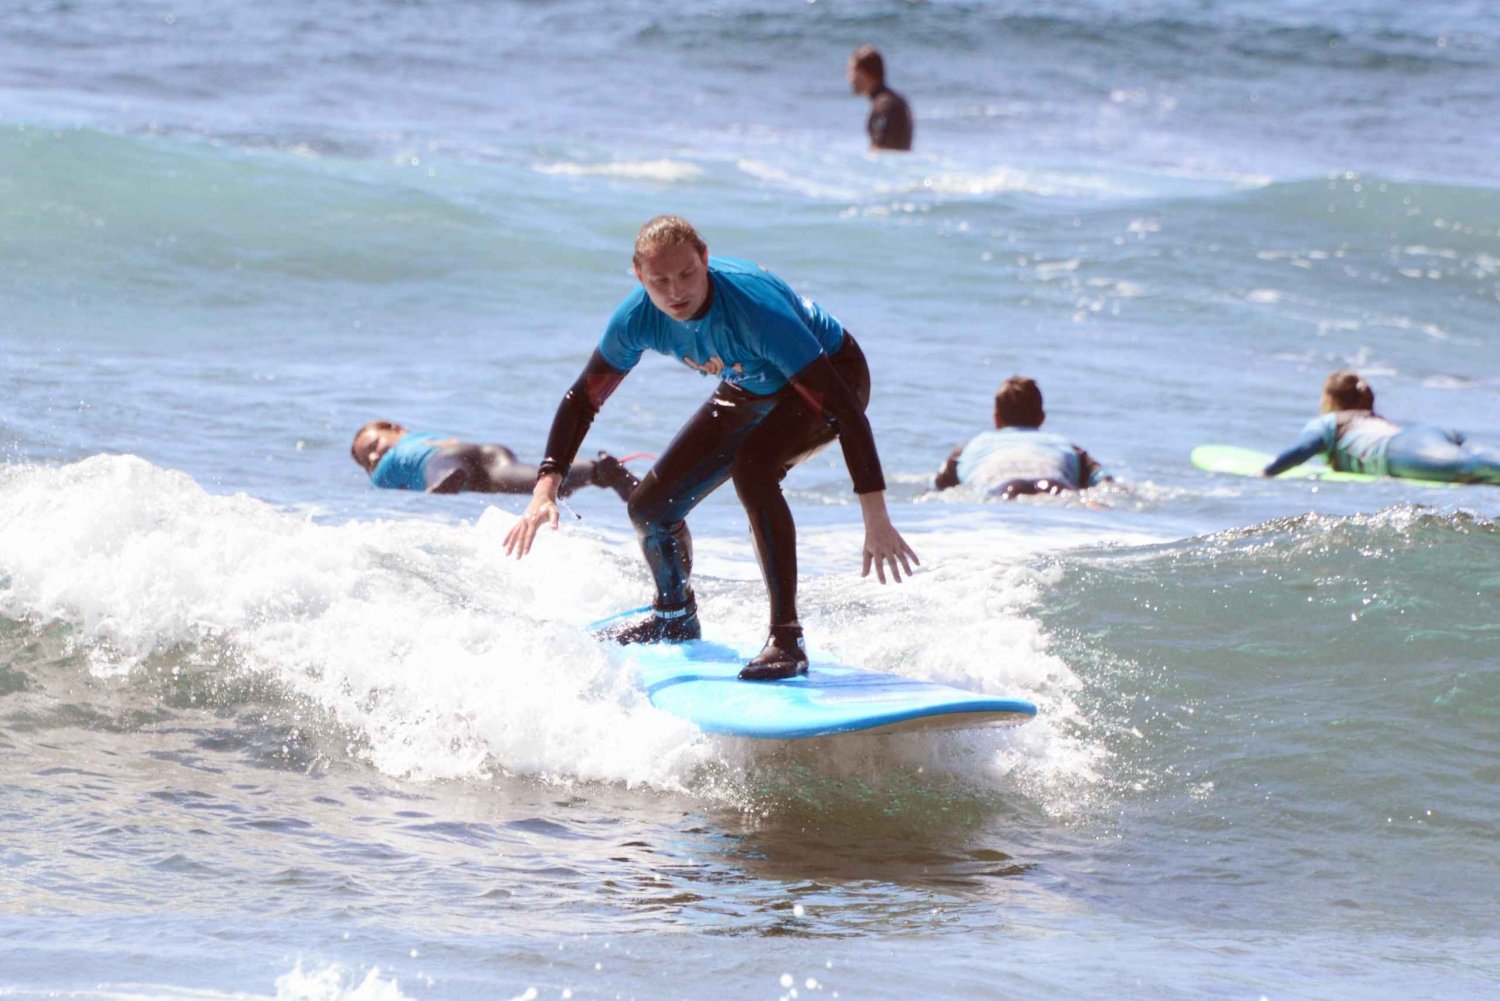 Tenerife: Surfing Lesson for All Levels with Photos